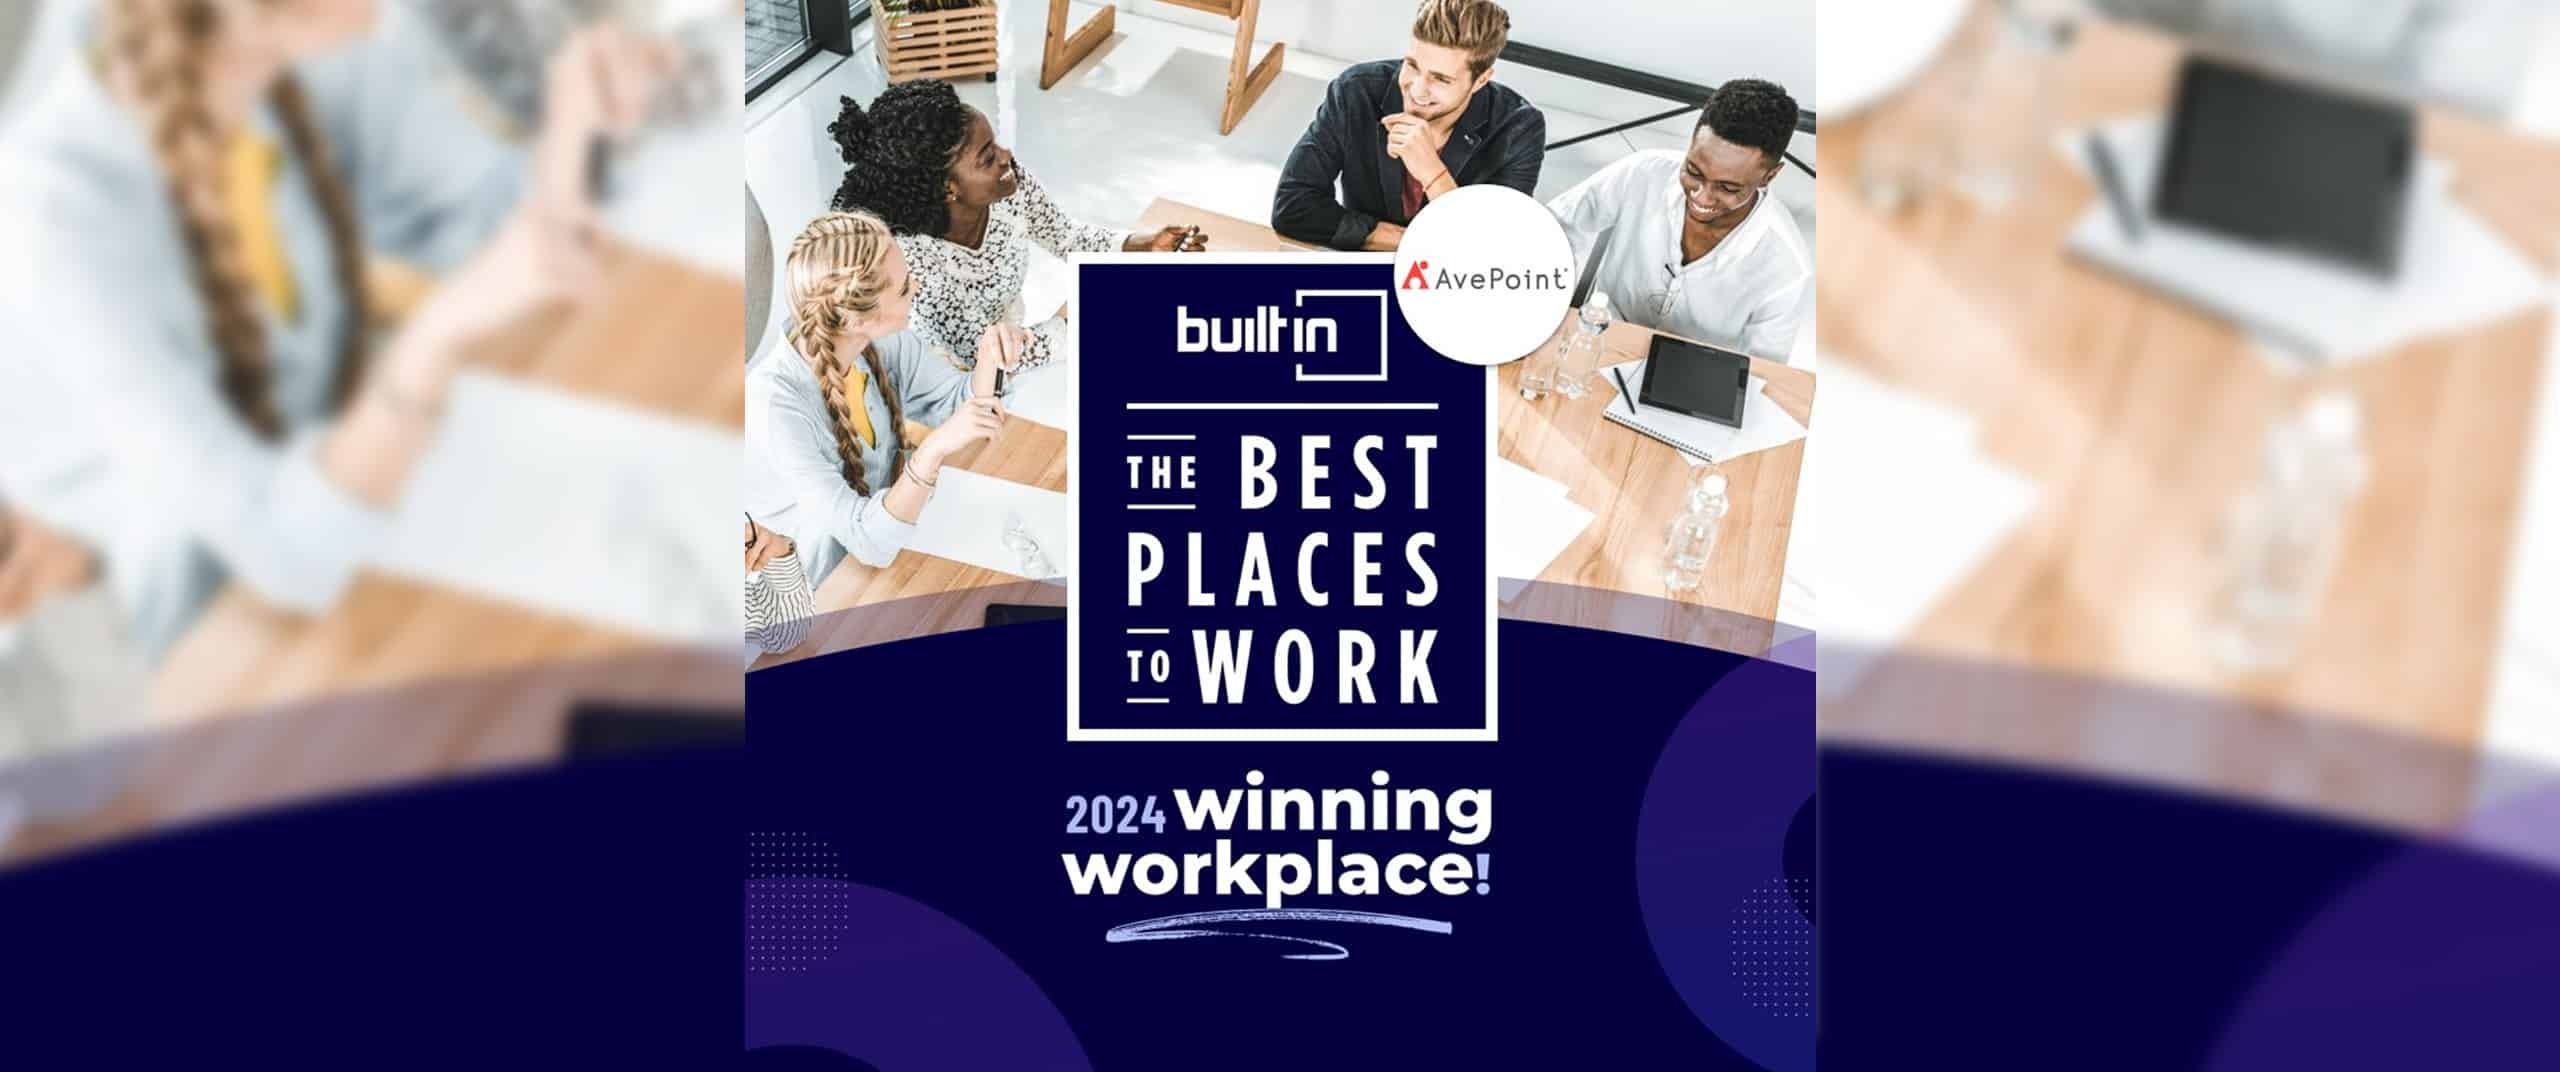 AvePoint Wins 7 Awards from Built Ins Best Places to Work 2024